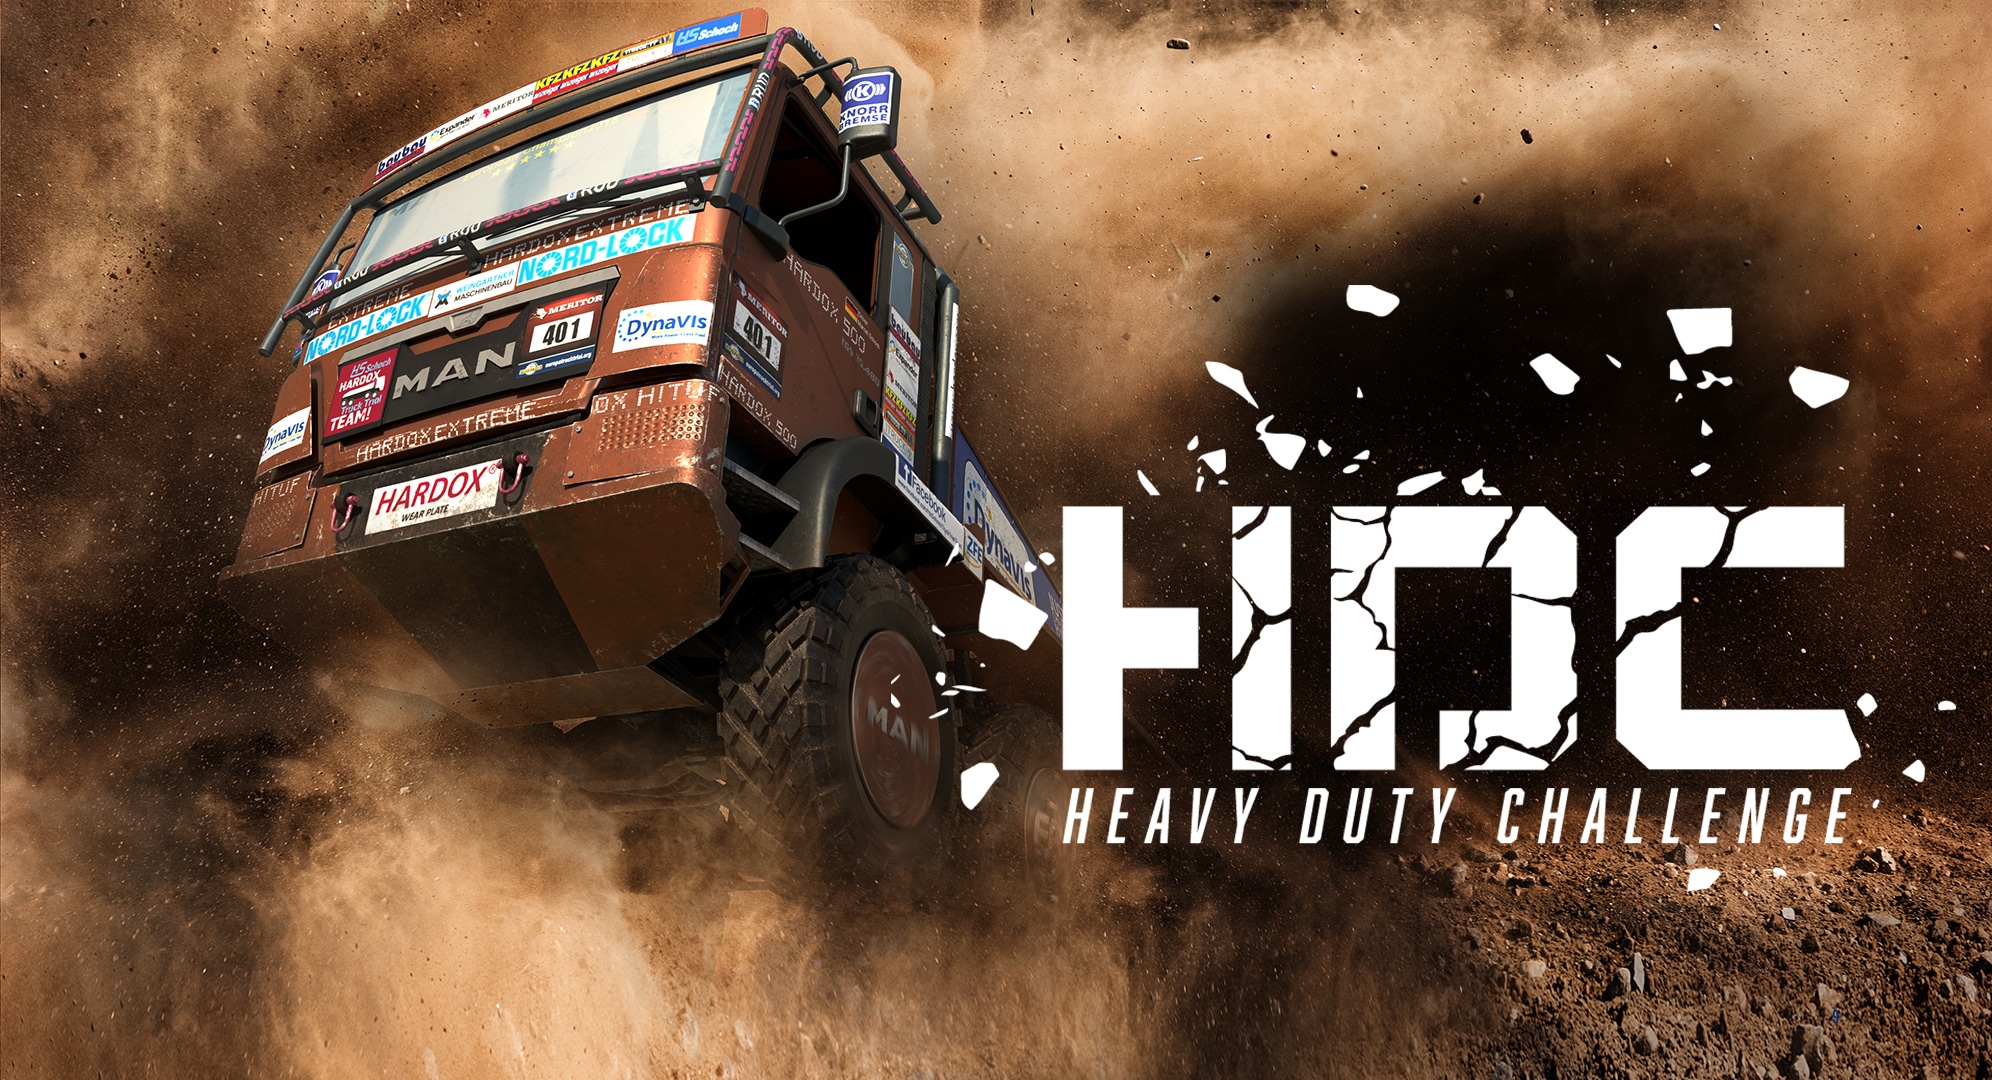 Heavy Duty Challenge PC off-road truck simulator will be released in the fall